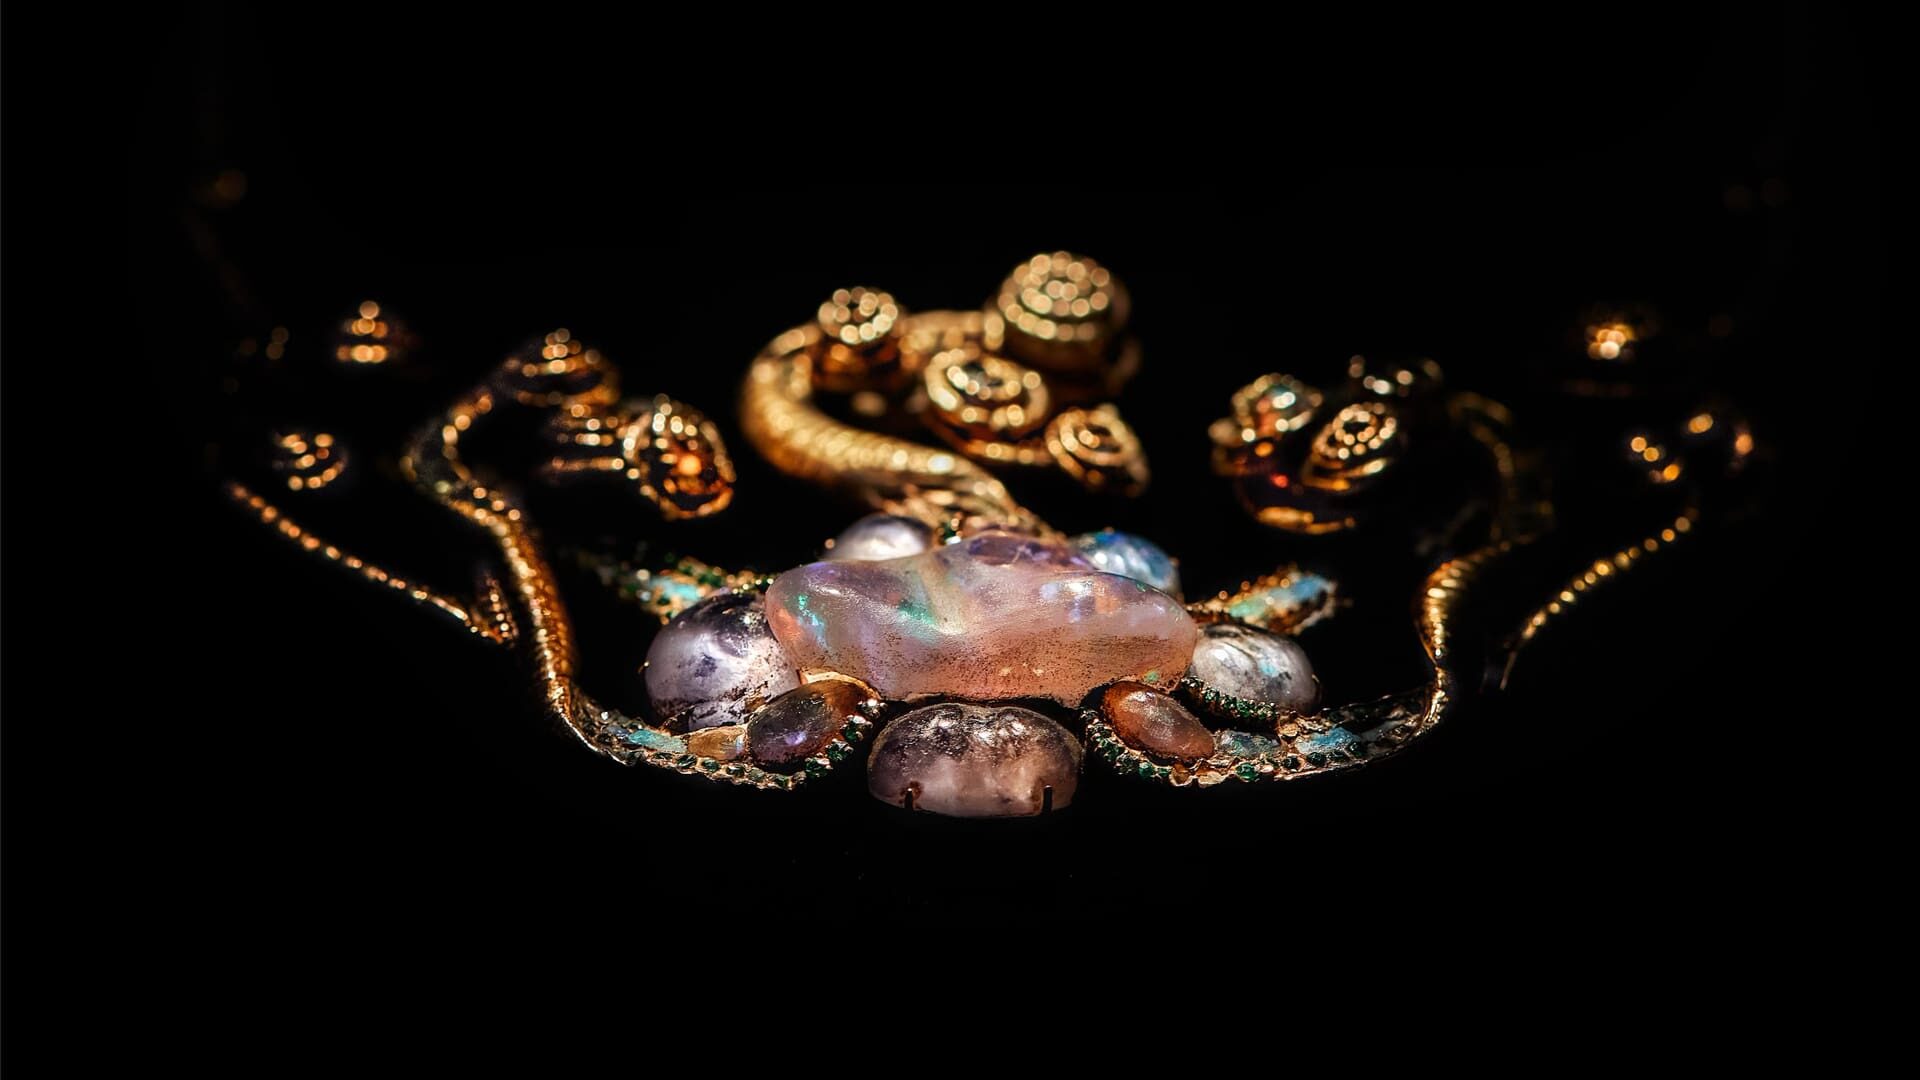 Exquisite Louis Comfort Tiffany Medusa pendant featuring iridescent opals and intricate gold filigree work.